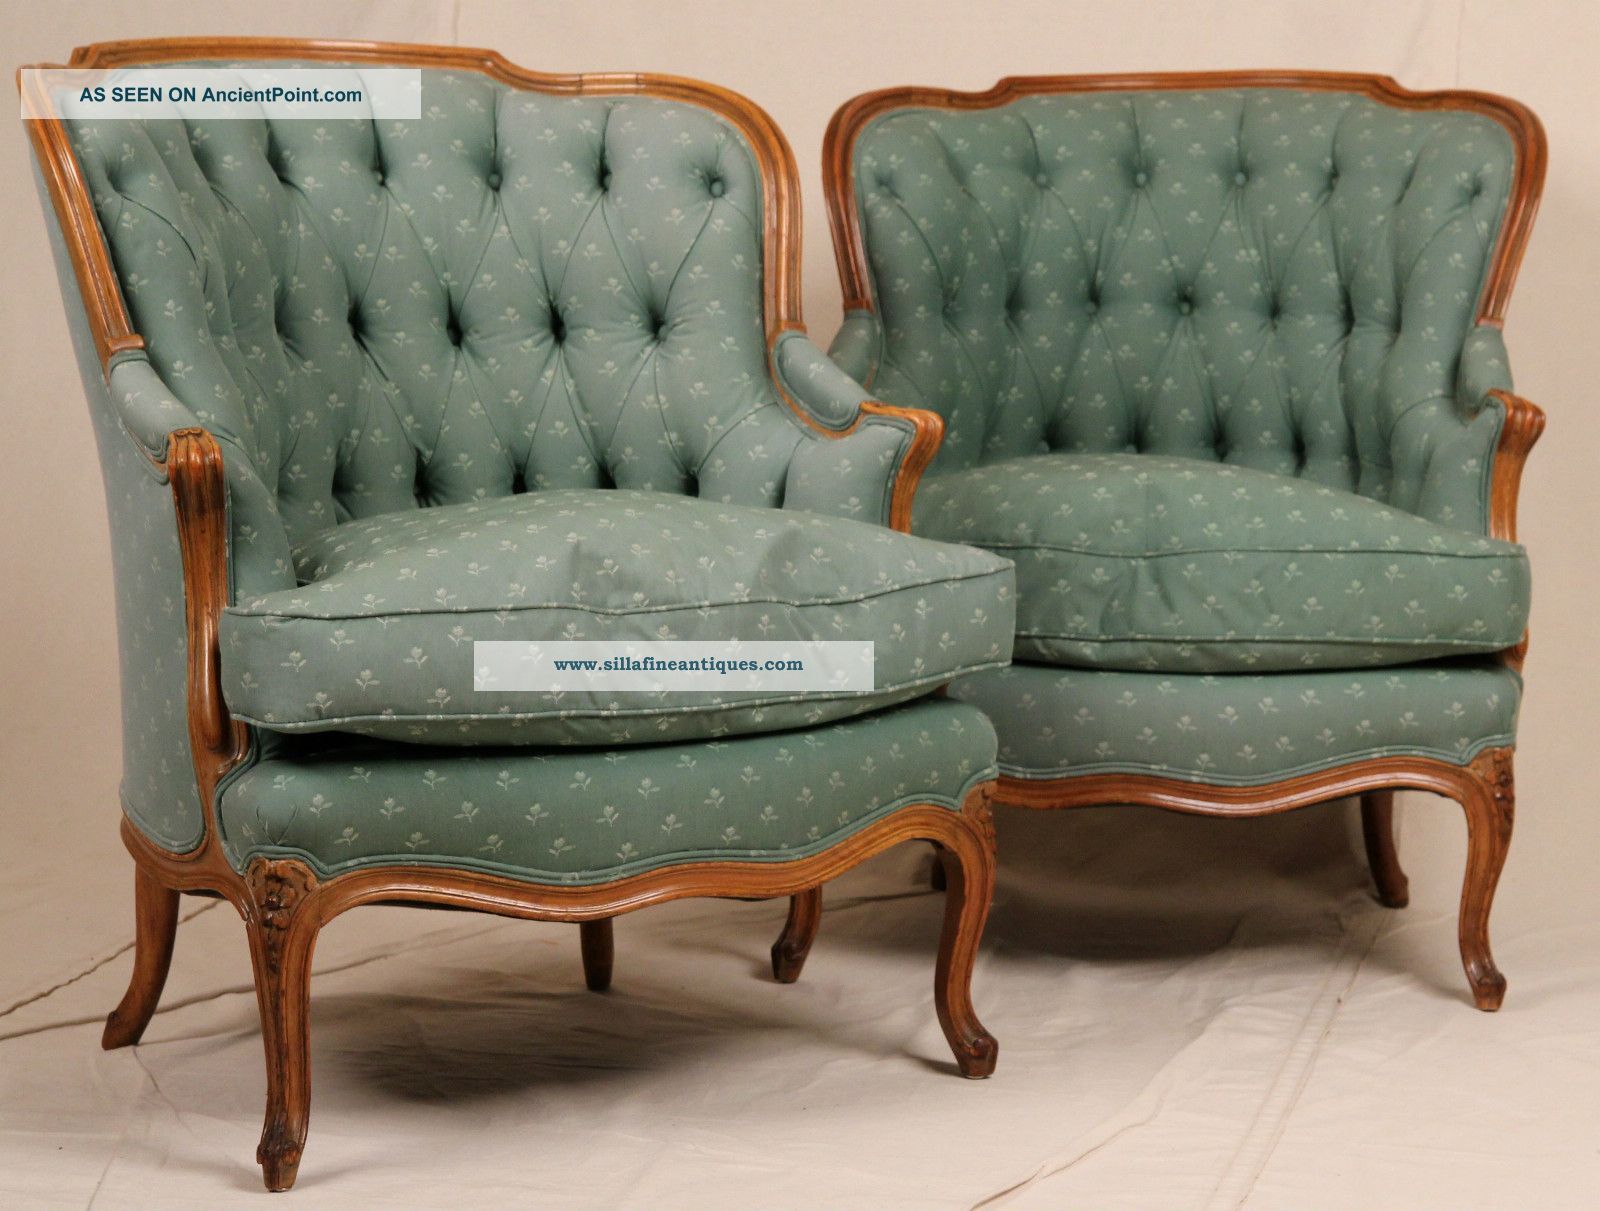 Pair Of French Louis Xv Antique Tufted Barrel Or Wing Back Bergere Arm Chairs 1800-1899 photo